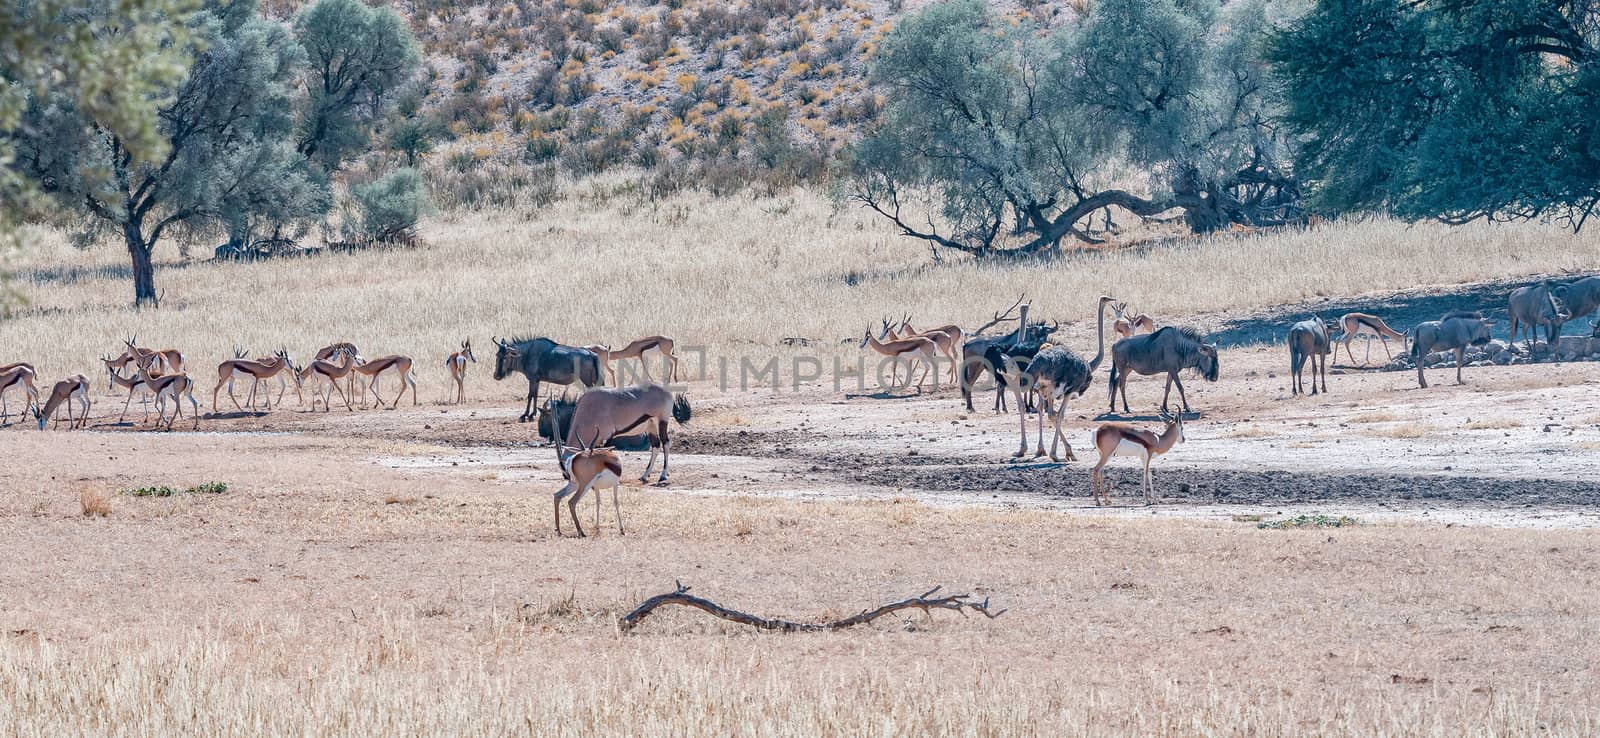 Oryx, wildebeest, springbok and ostriches in the arid Kgalagadi by dpreezg